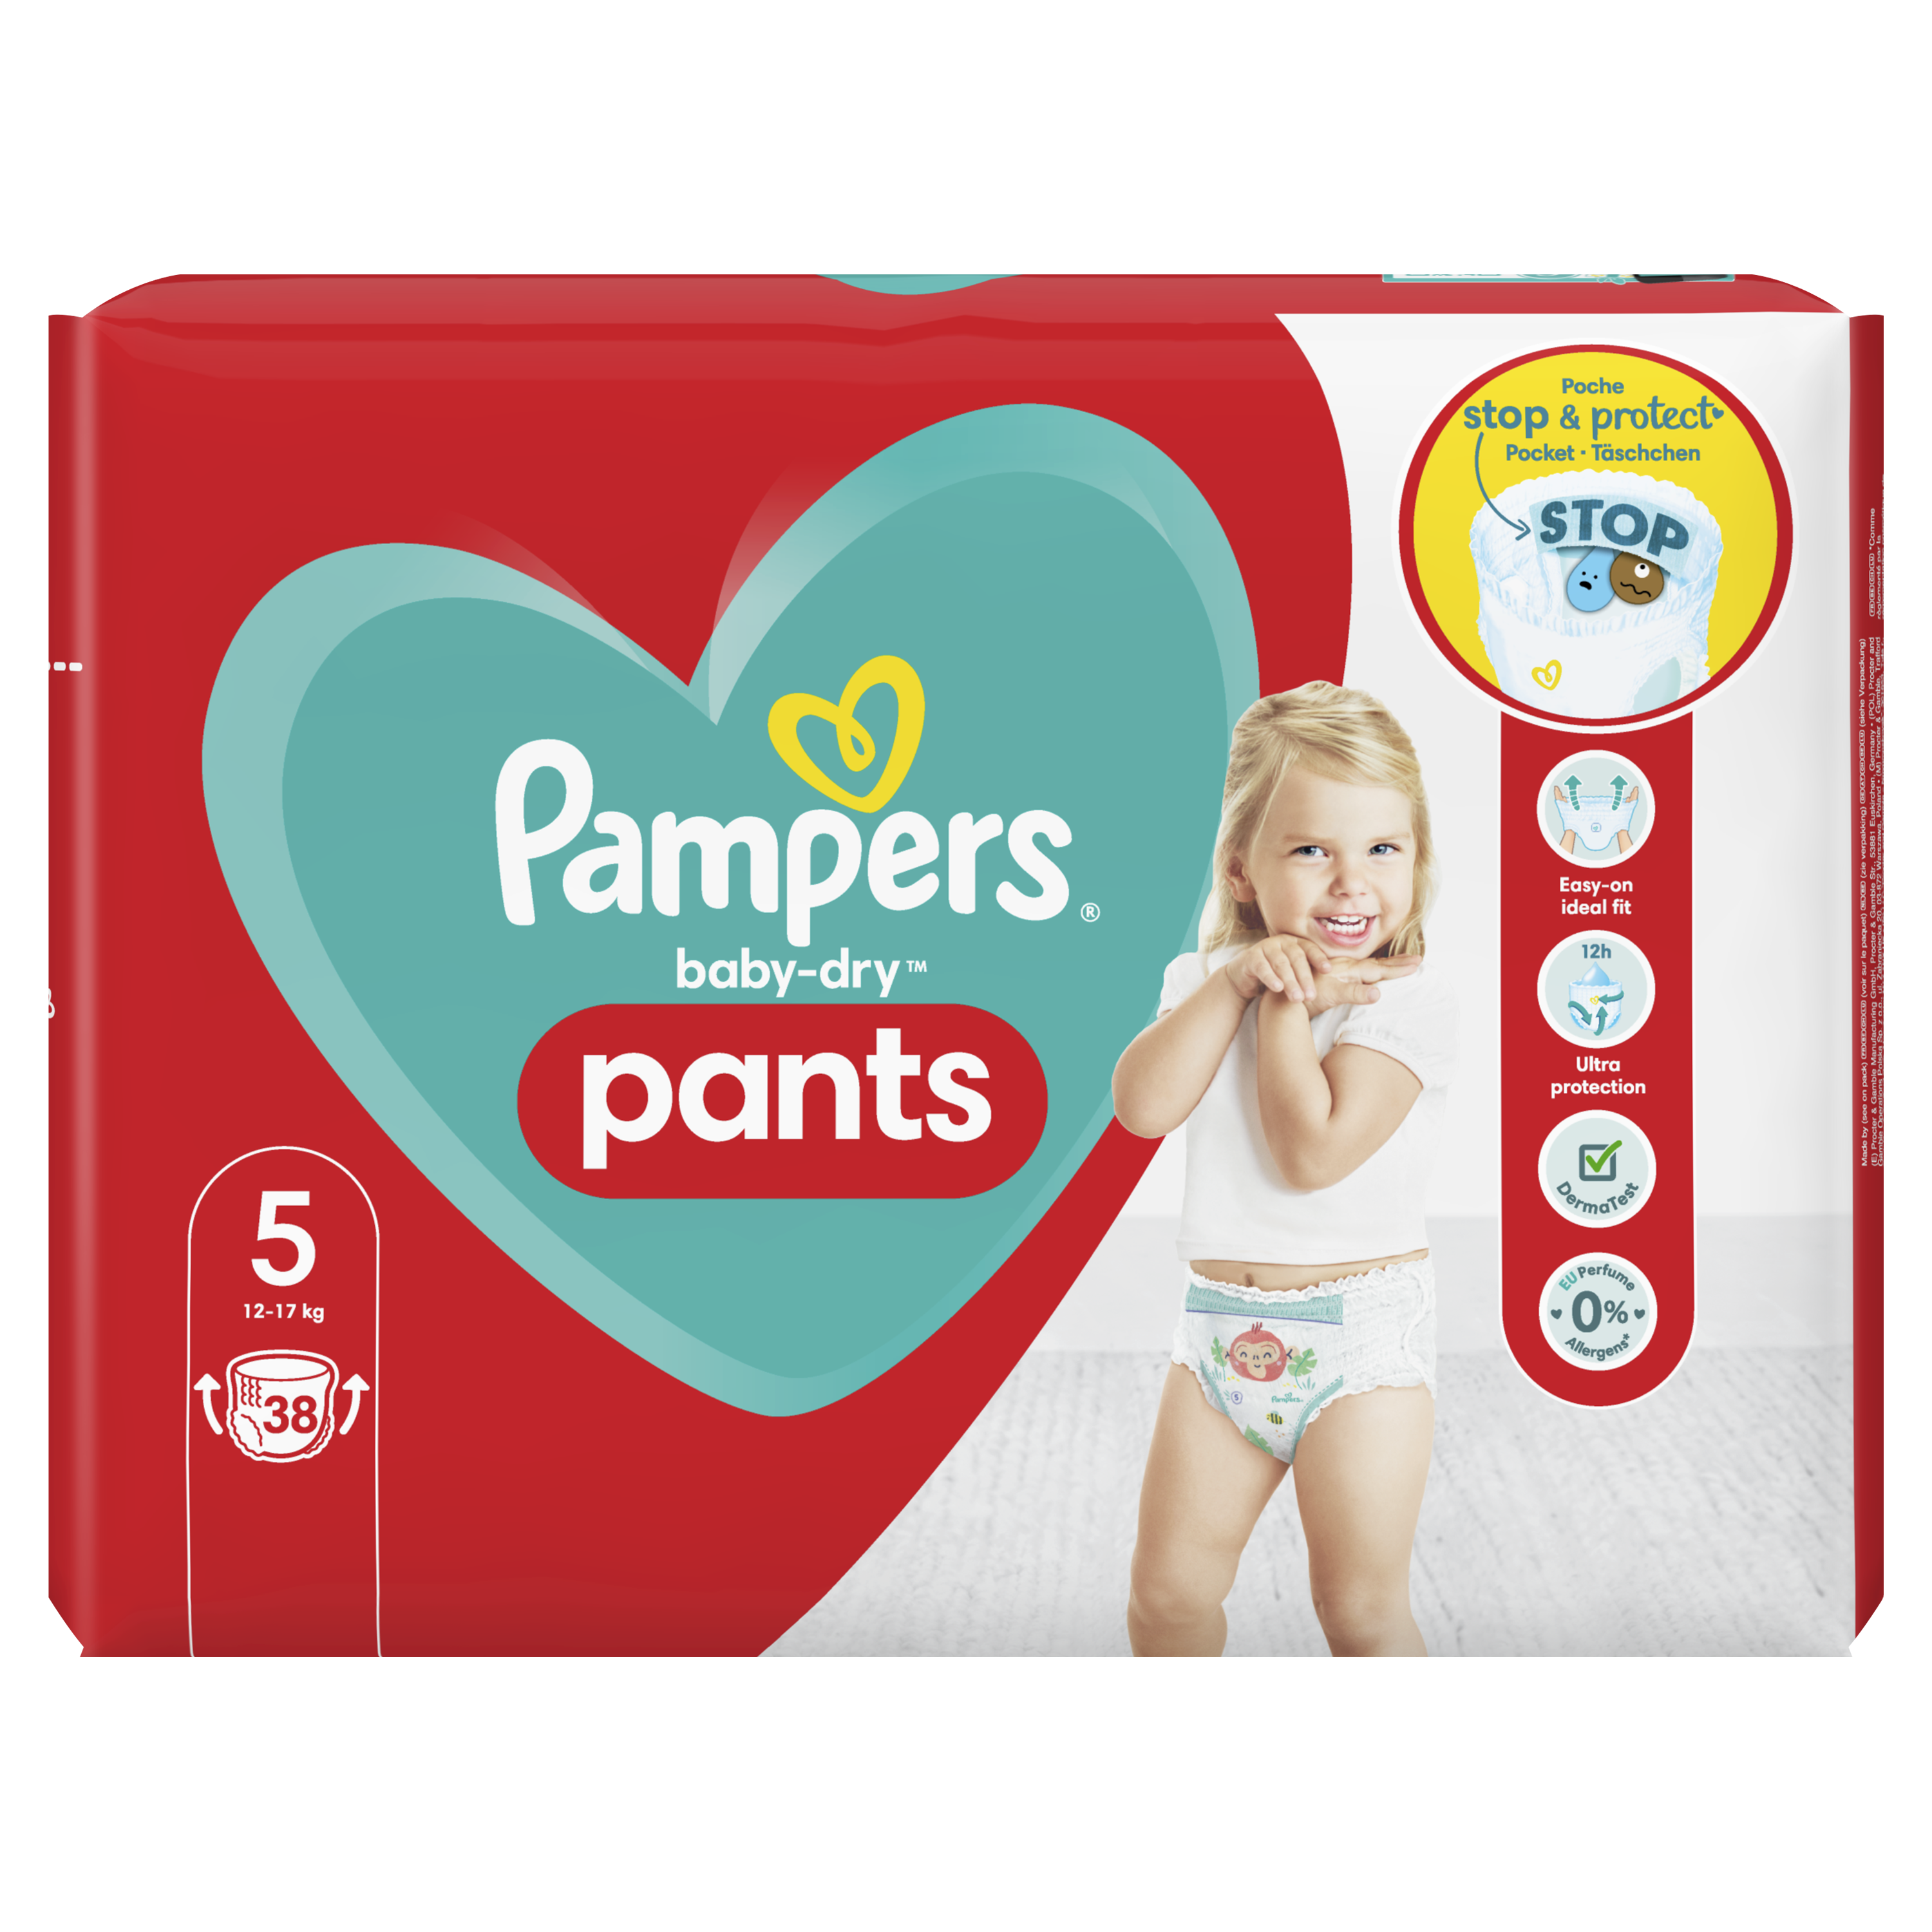 pampers unilever